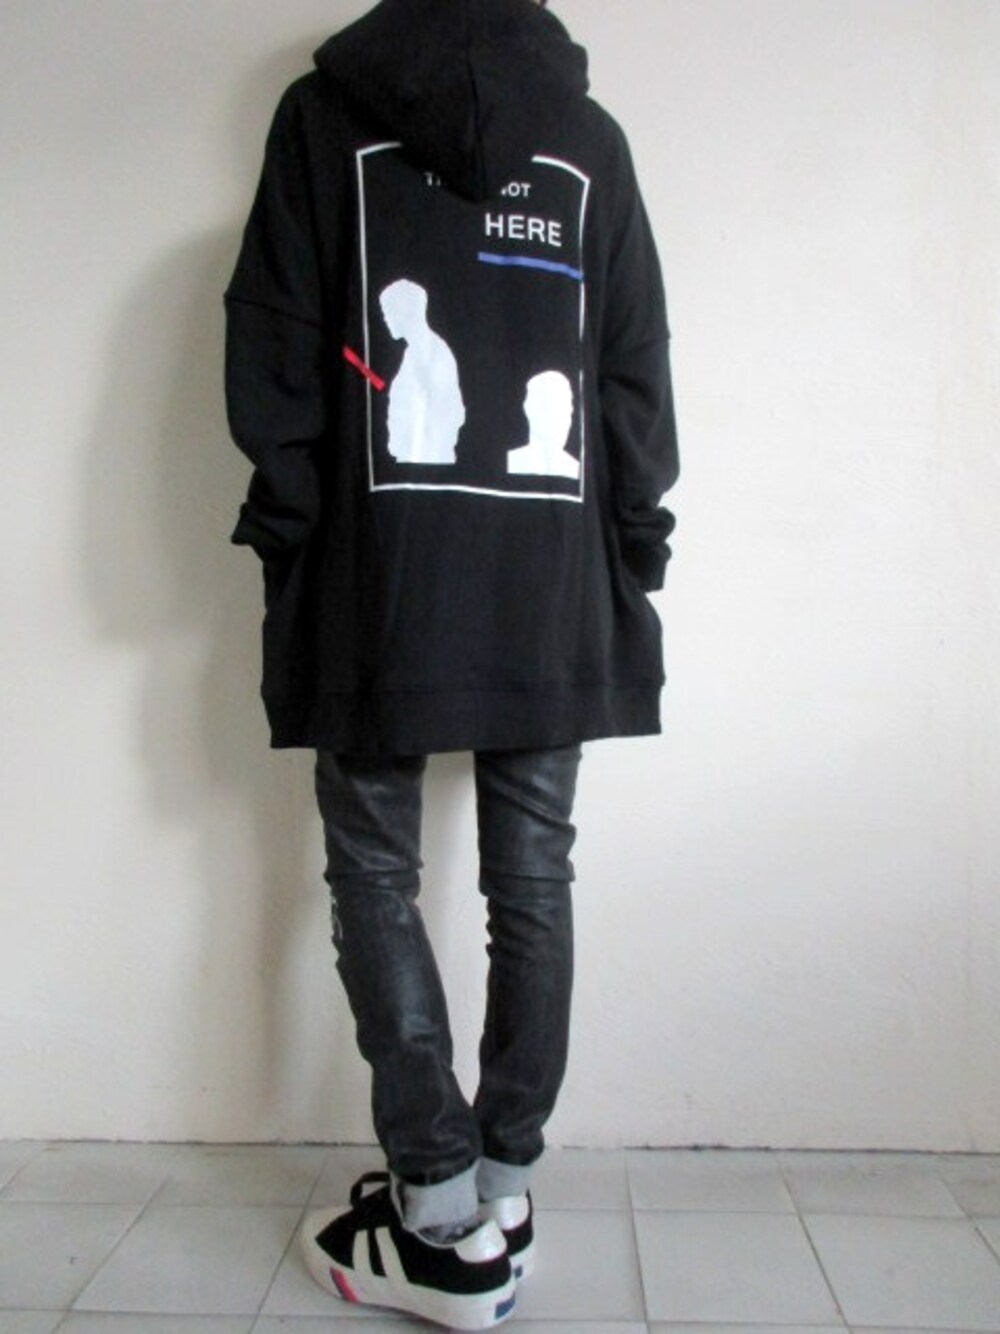 TITY niigataさんの「Luciole_jean pierre Print Big hoodie THIS IS NOT HERE・black 」を使ったコーディネート